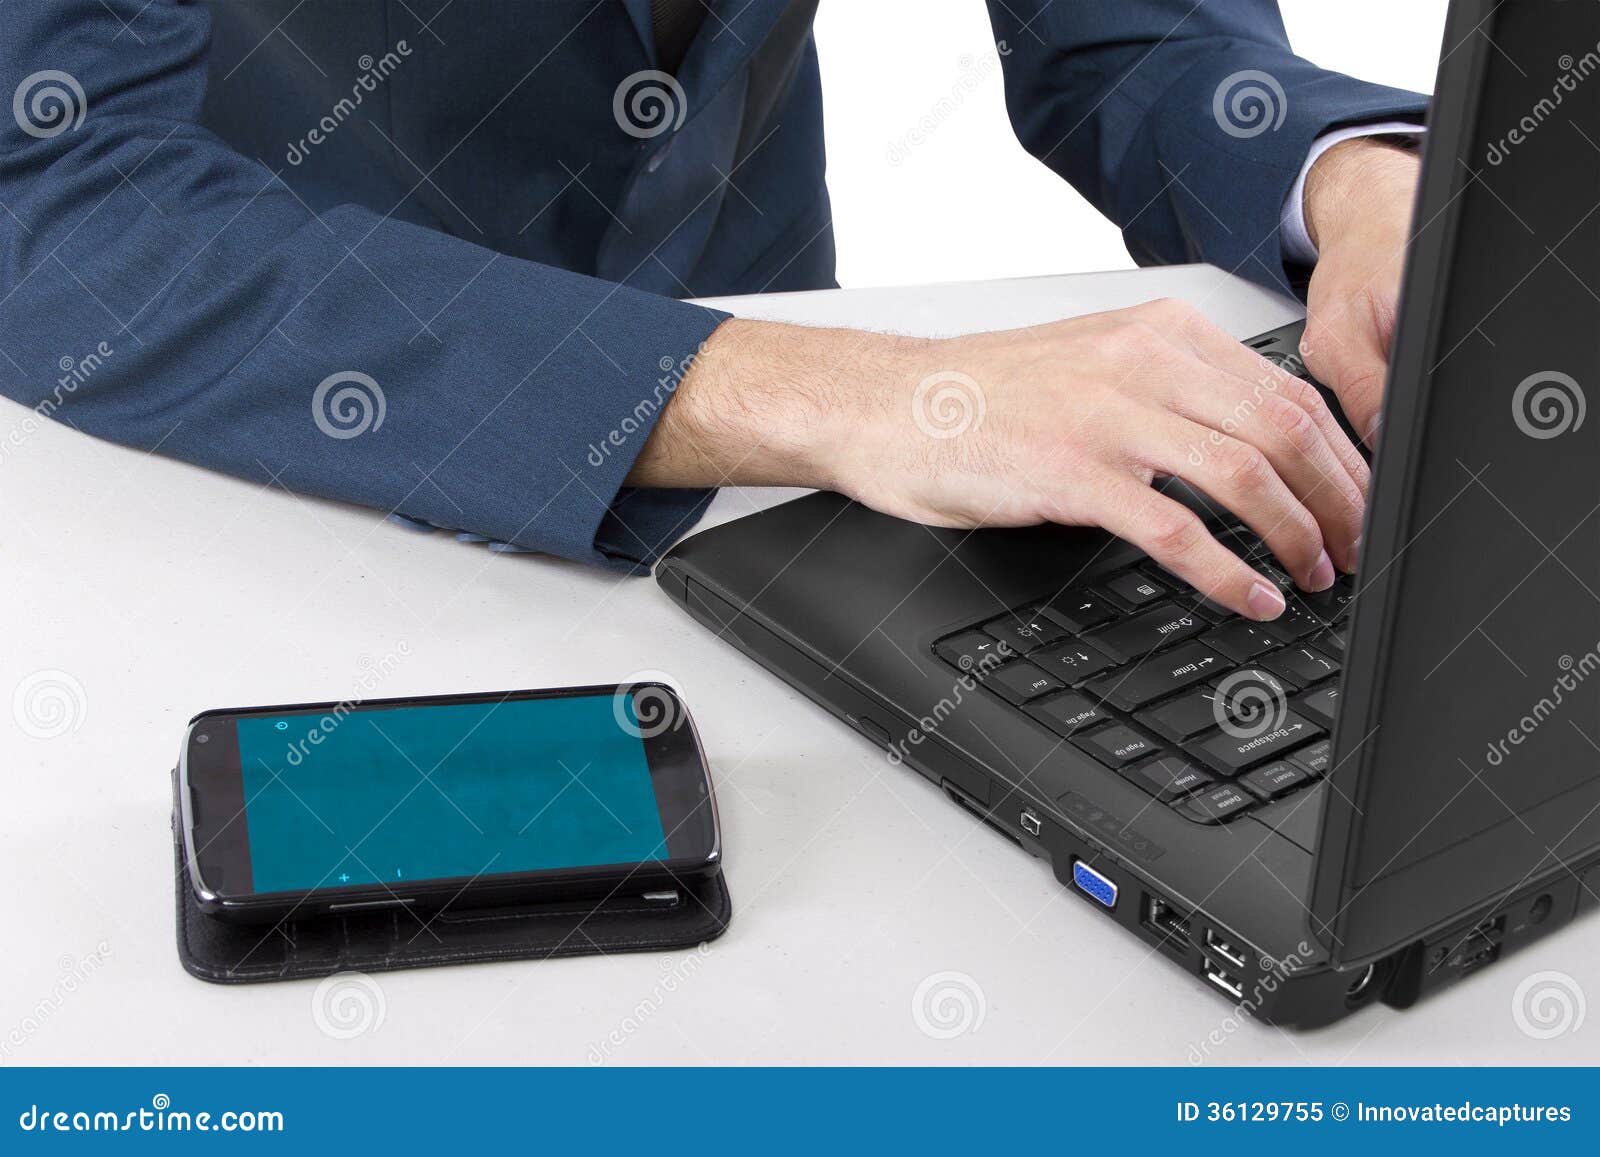 Cell Phone on Desk. Cellphone on desk with blank screen for composites